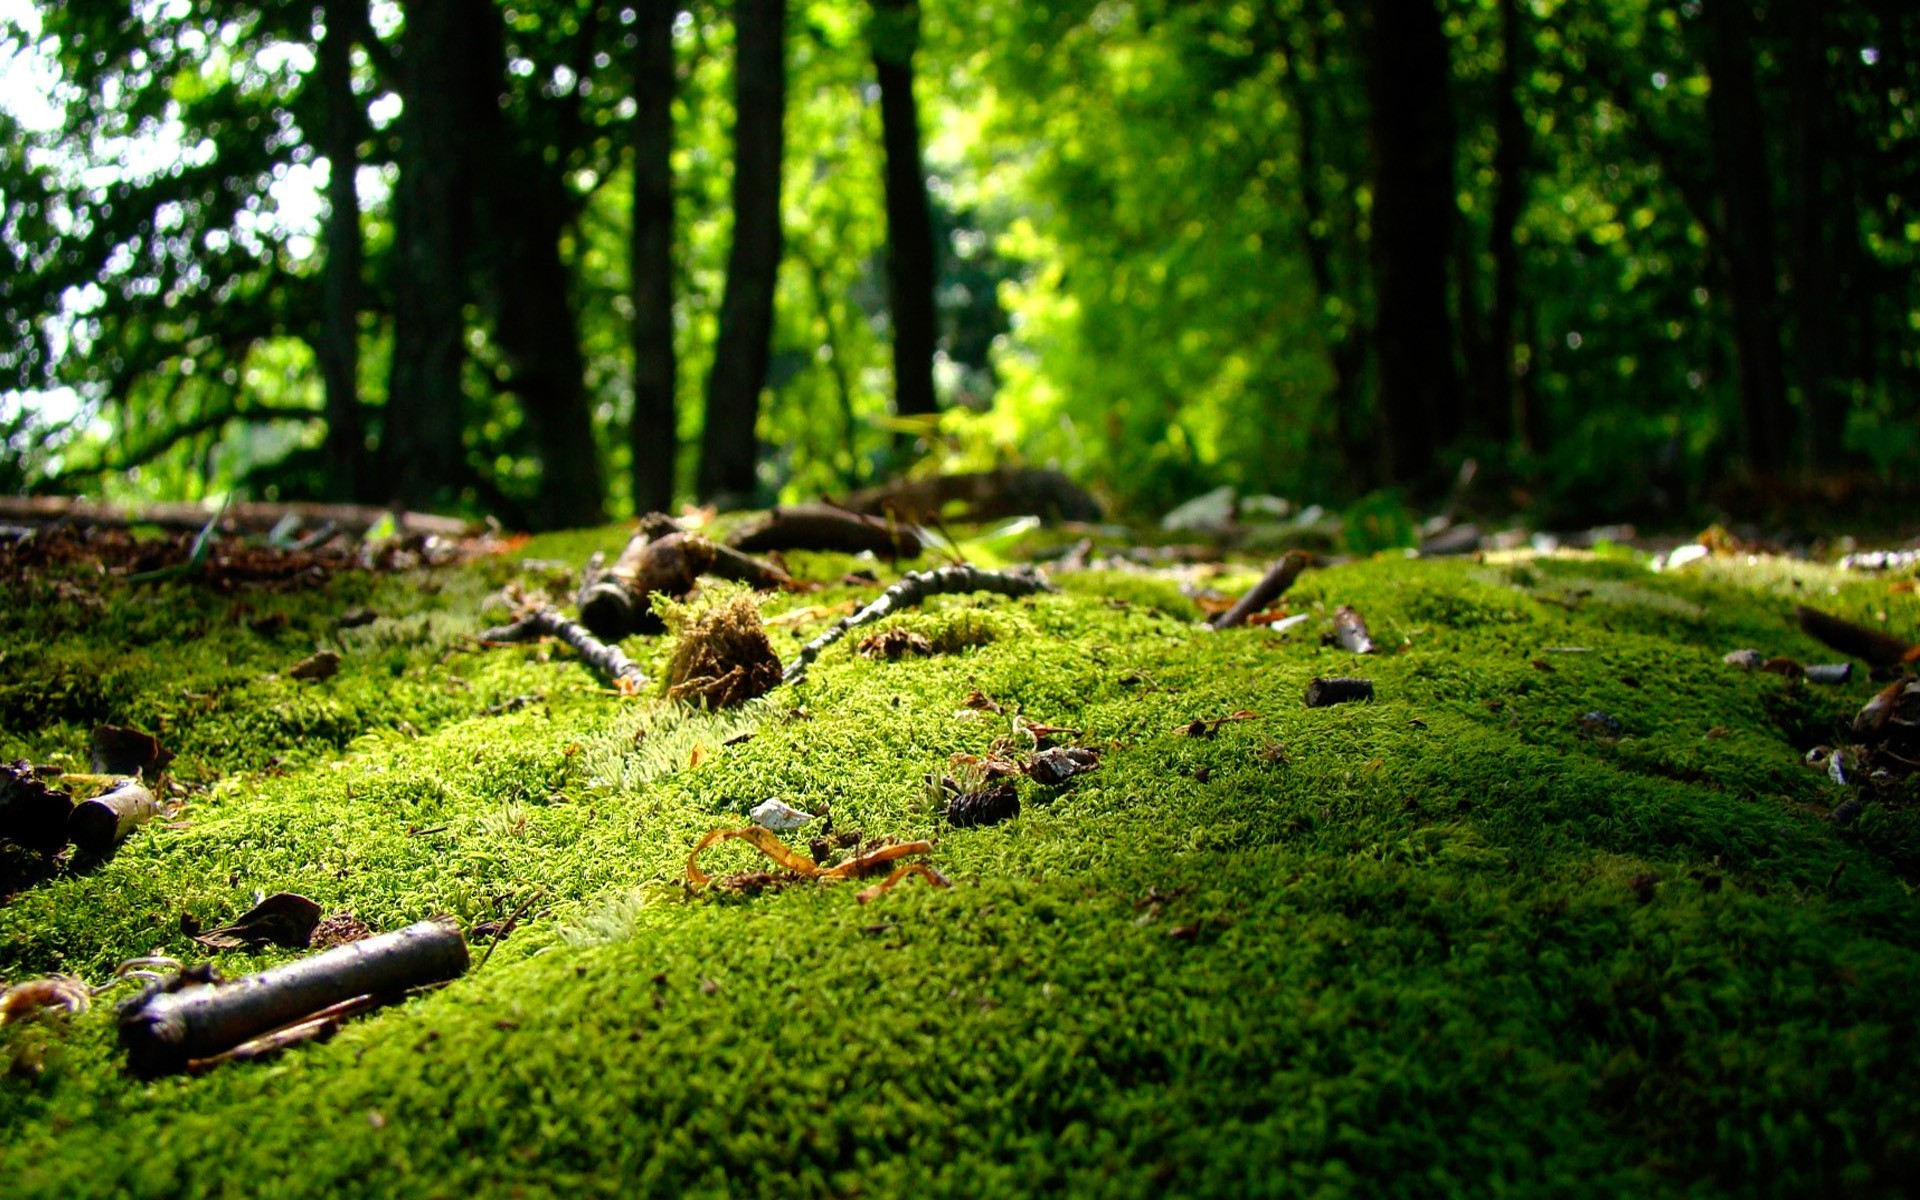 General 1920x1200 moss nature forest green worm's eye view trees